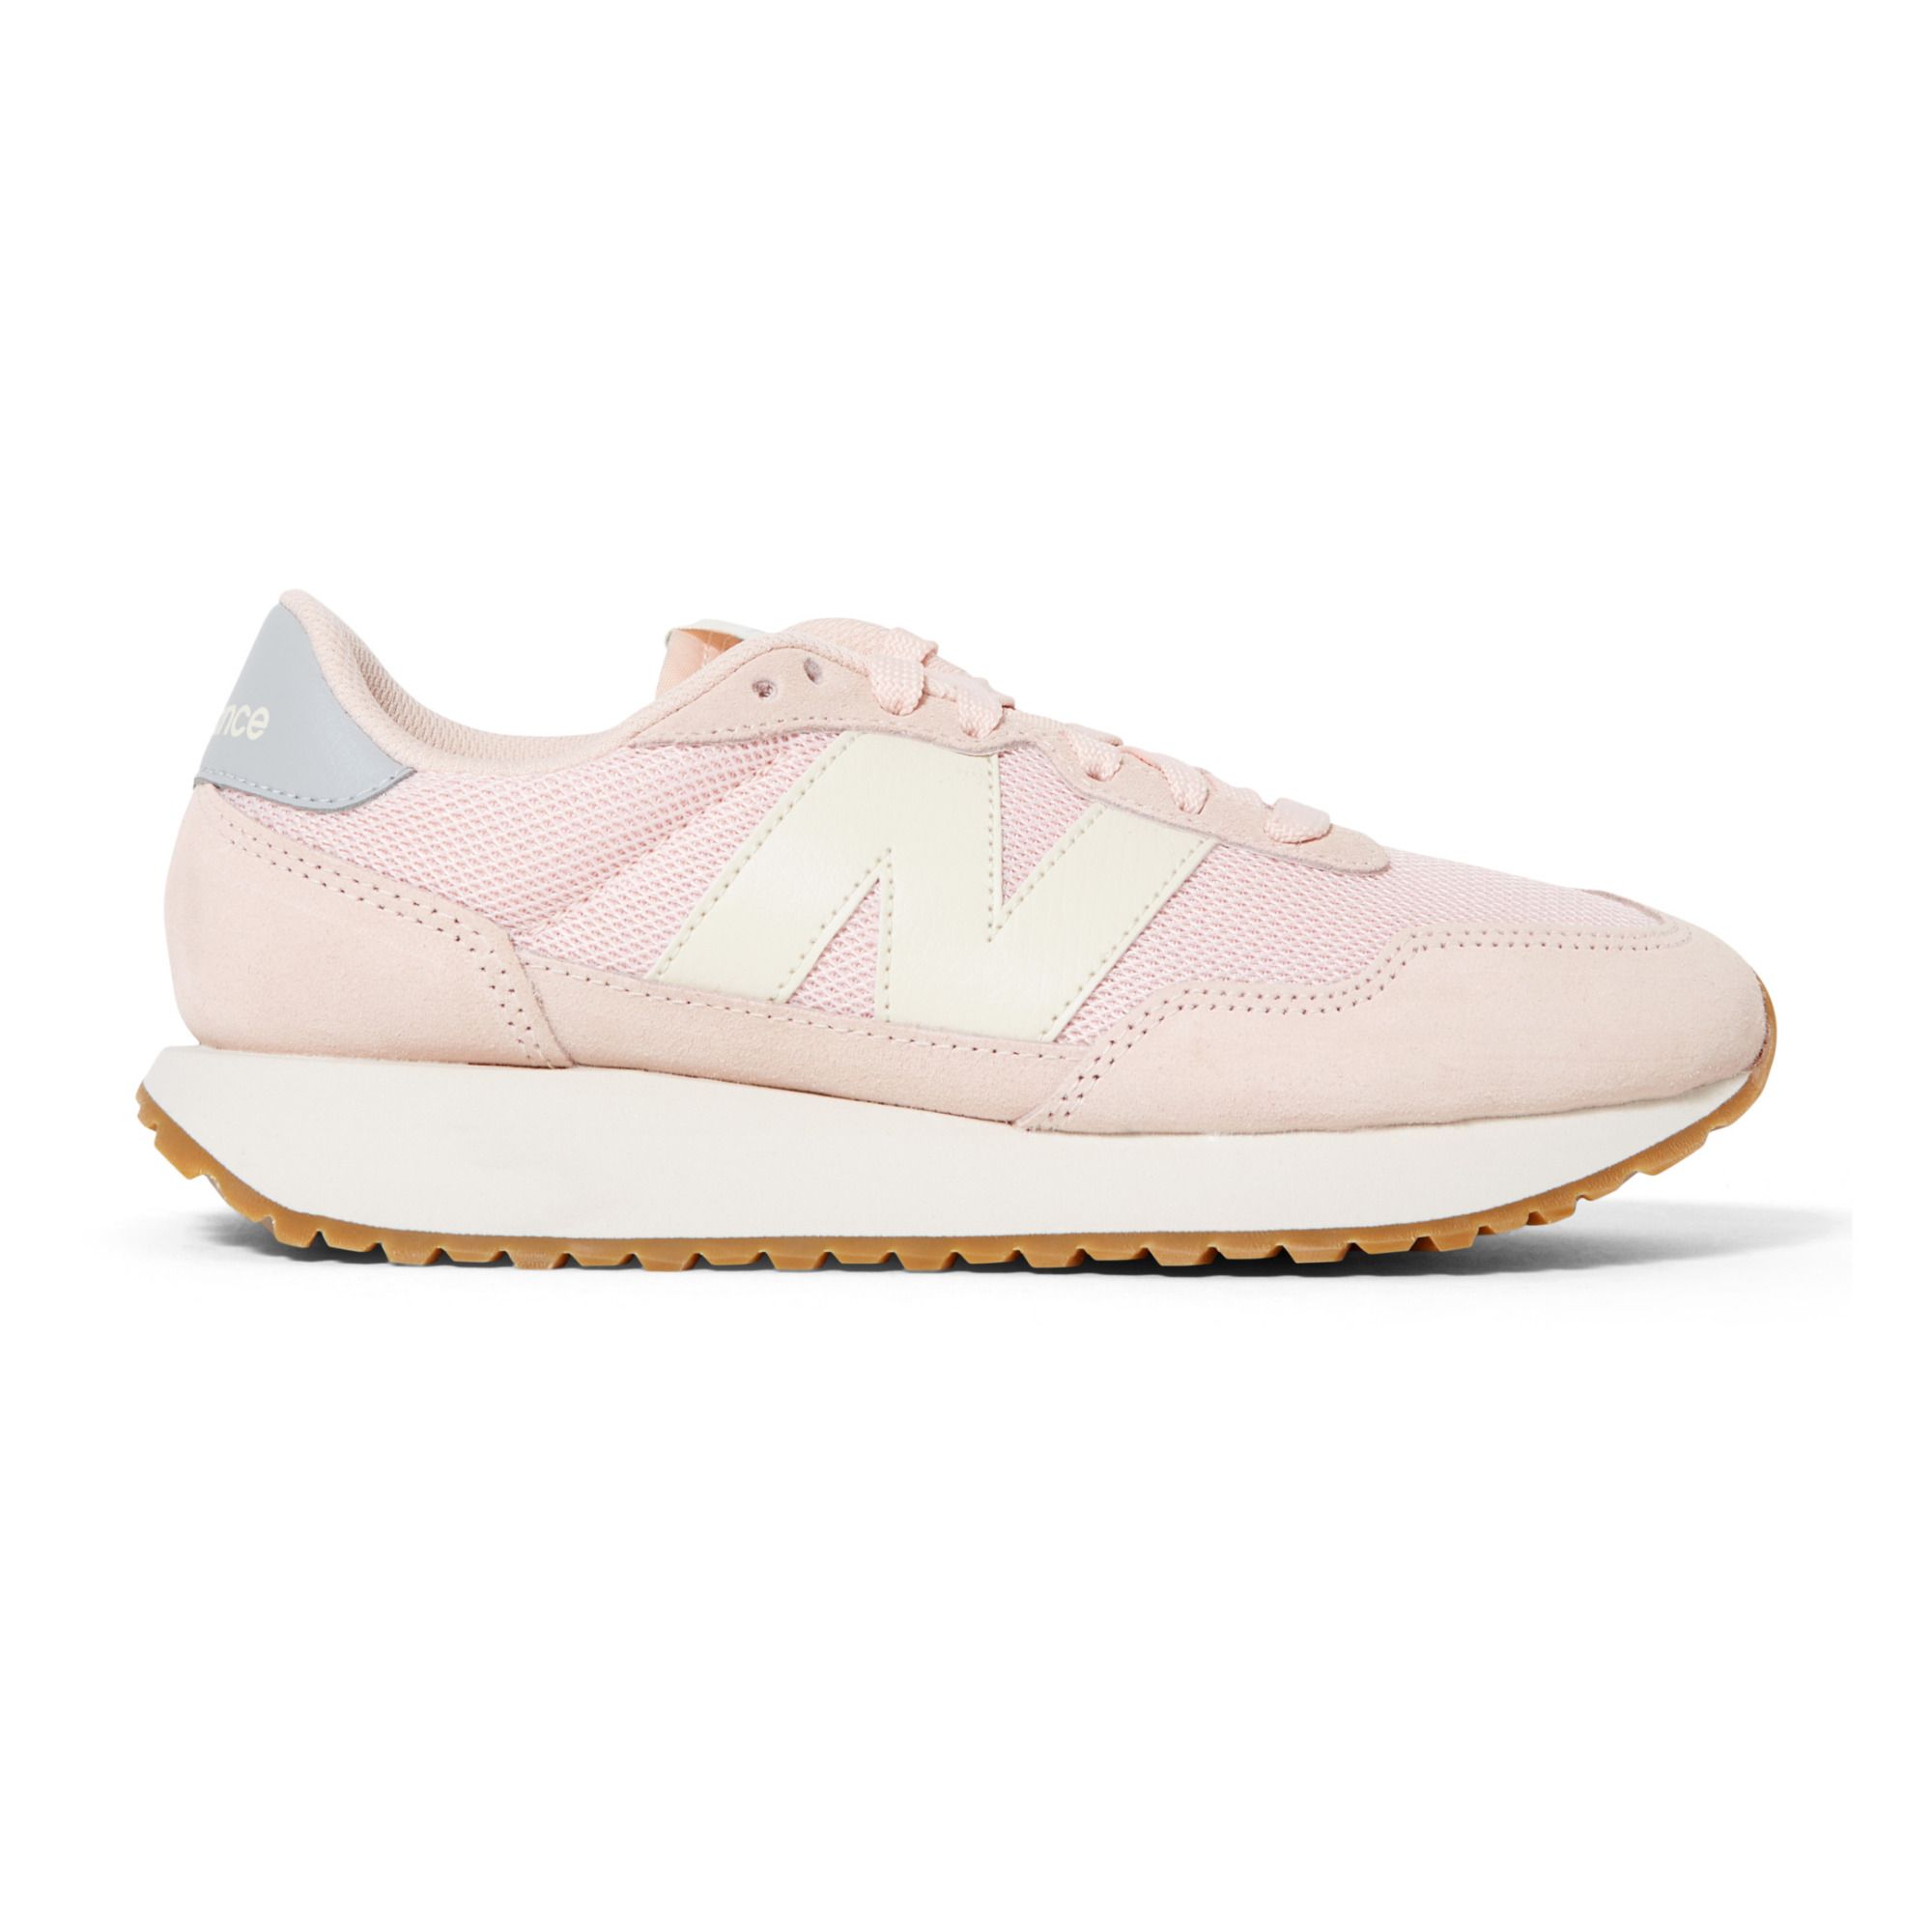 New Balance - Baskets 237 Bicolores - Collection Femme - - Rose